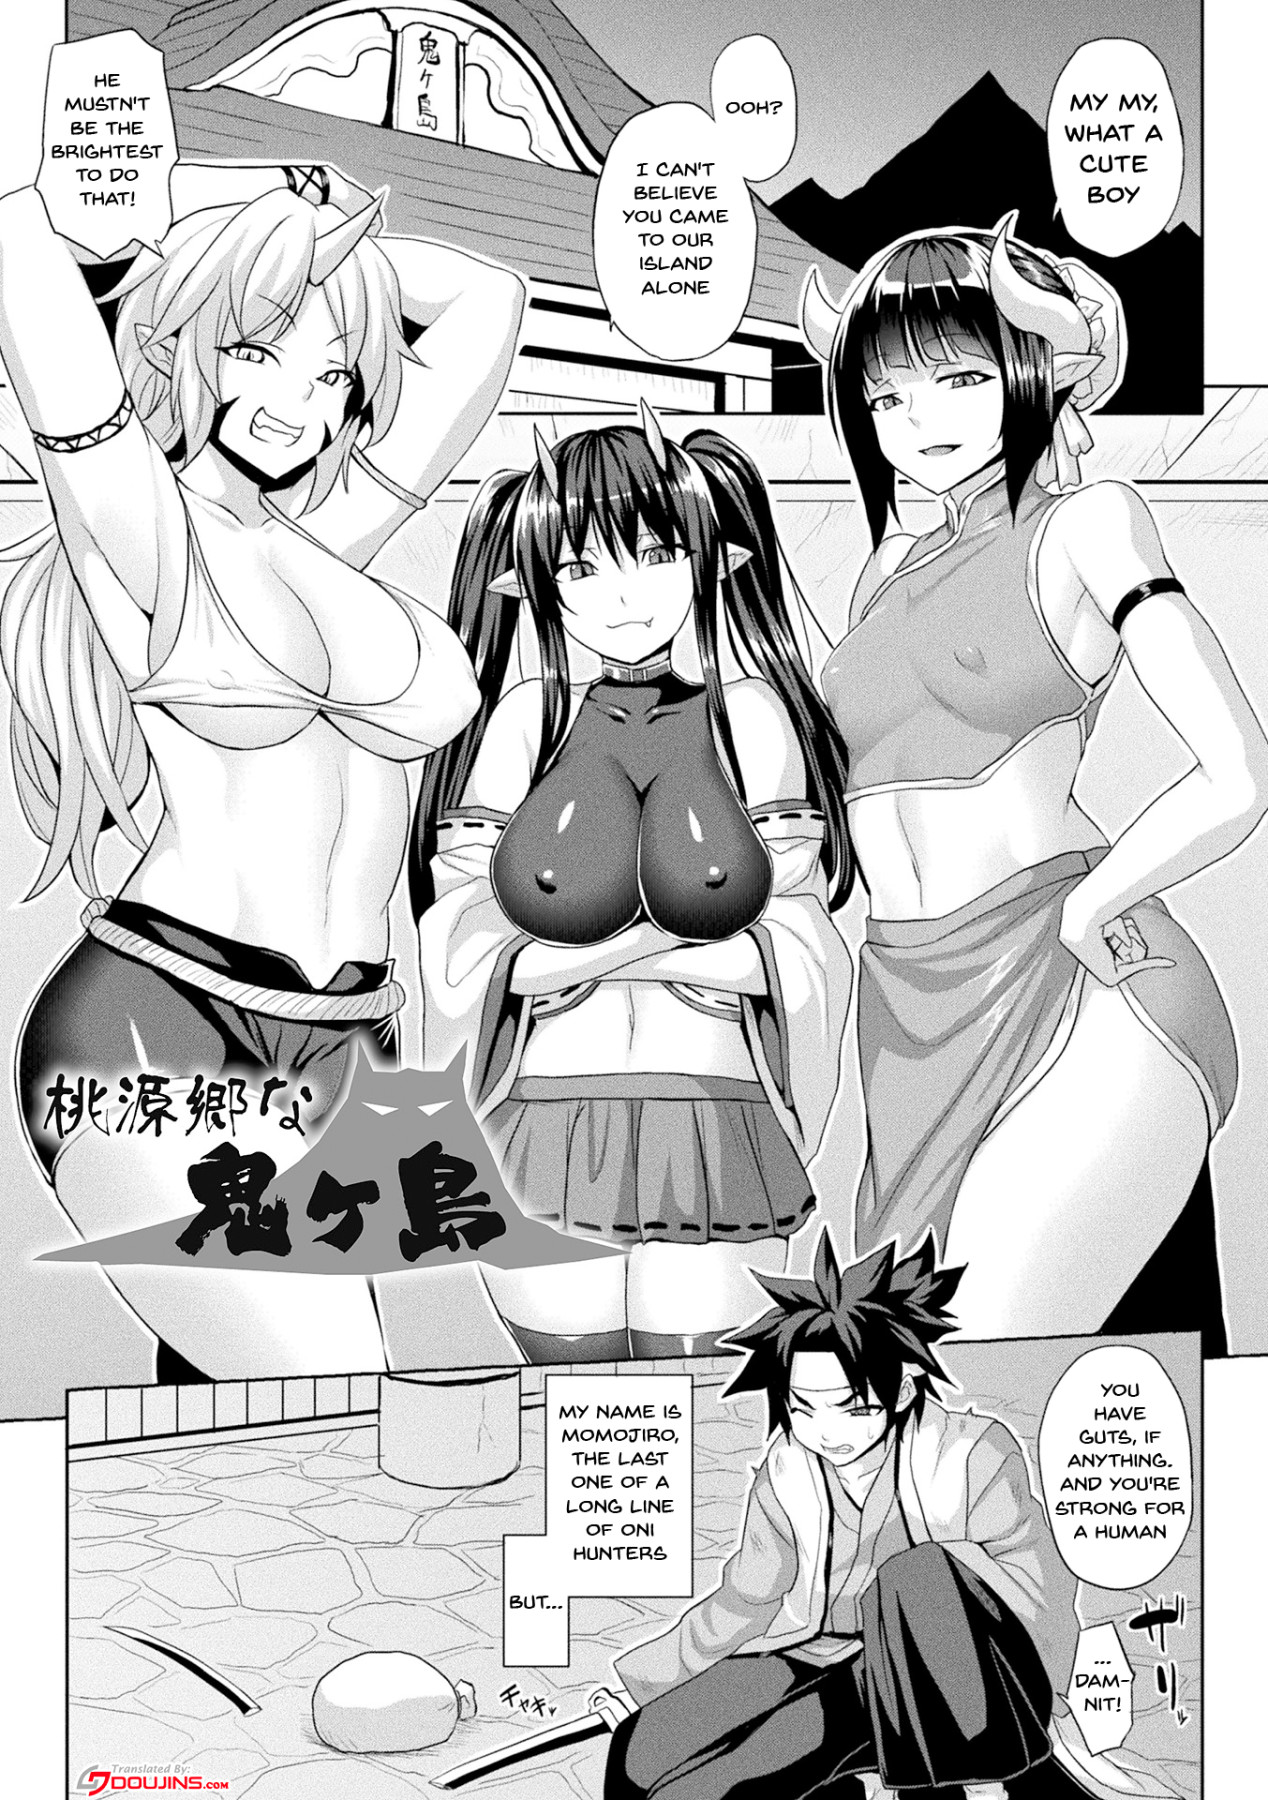 Hentai Manga Comic-The Woman Who's Fallen Into Being a Slut In Defeat-Chapter 4-1